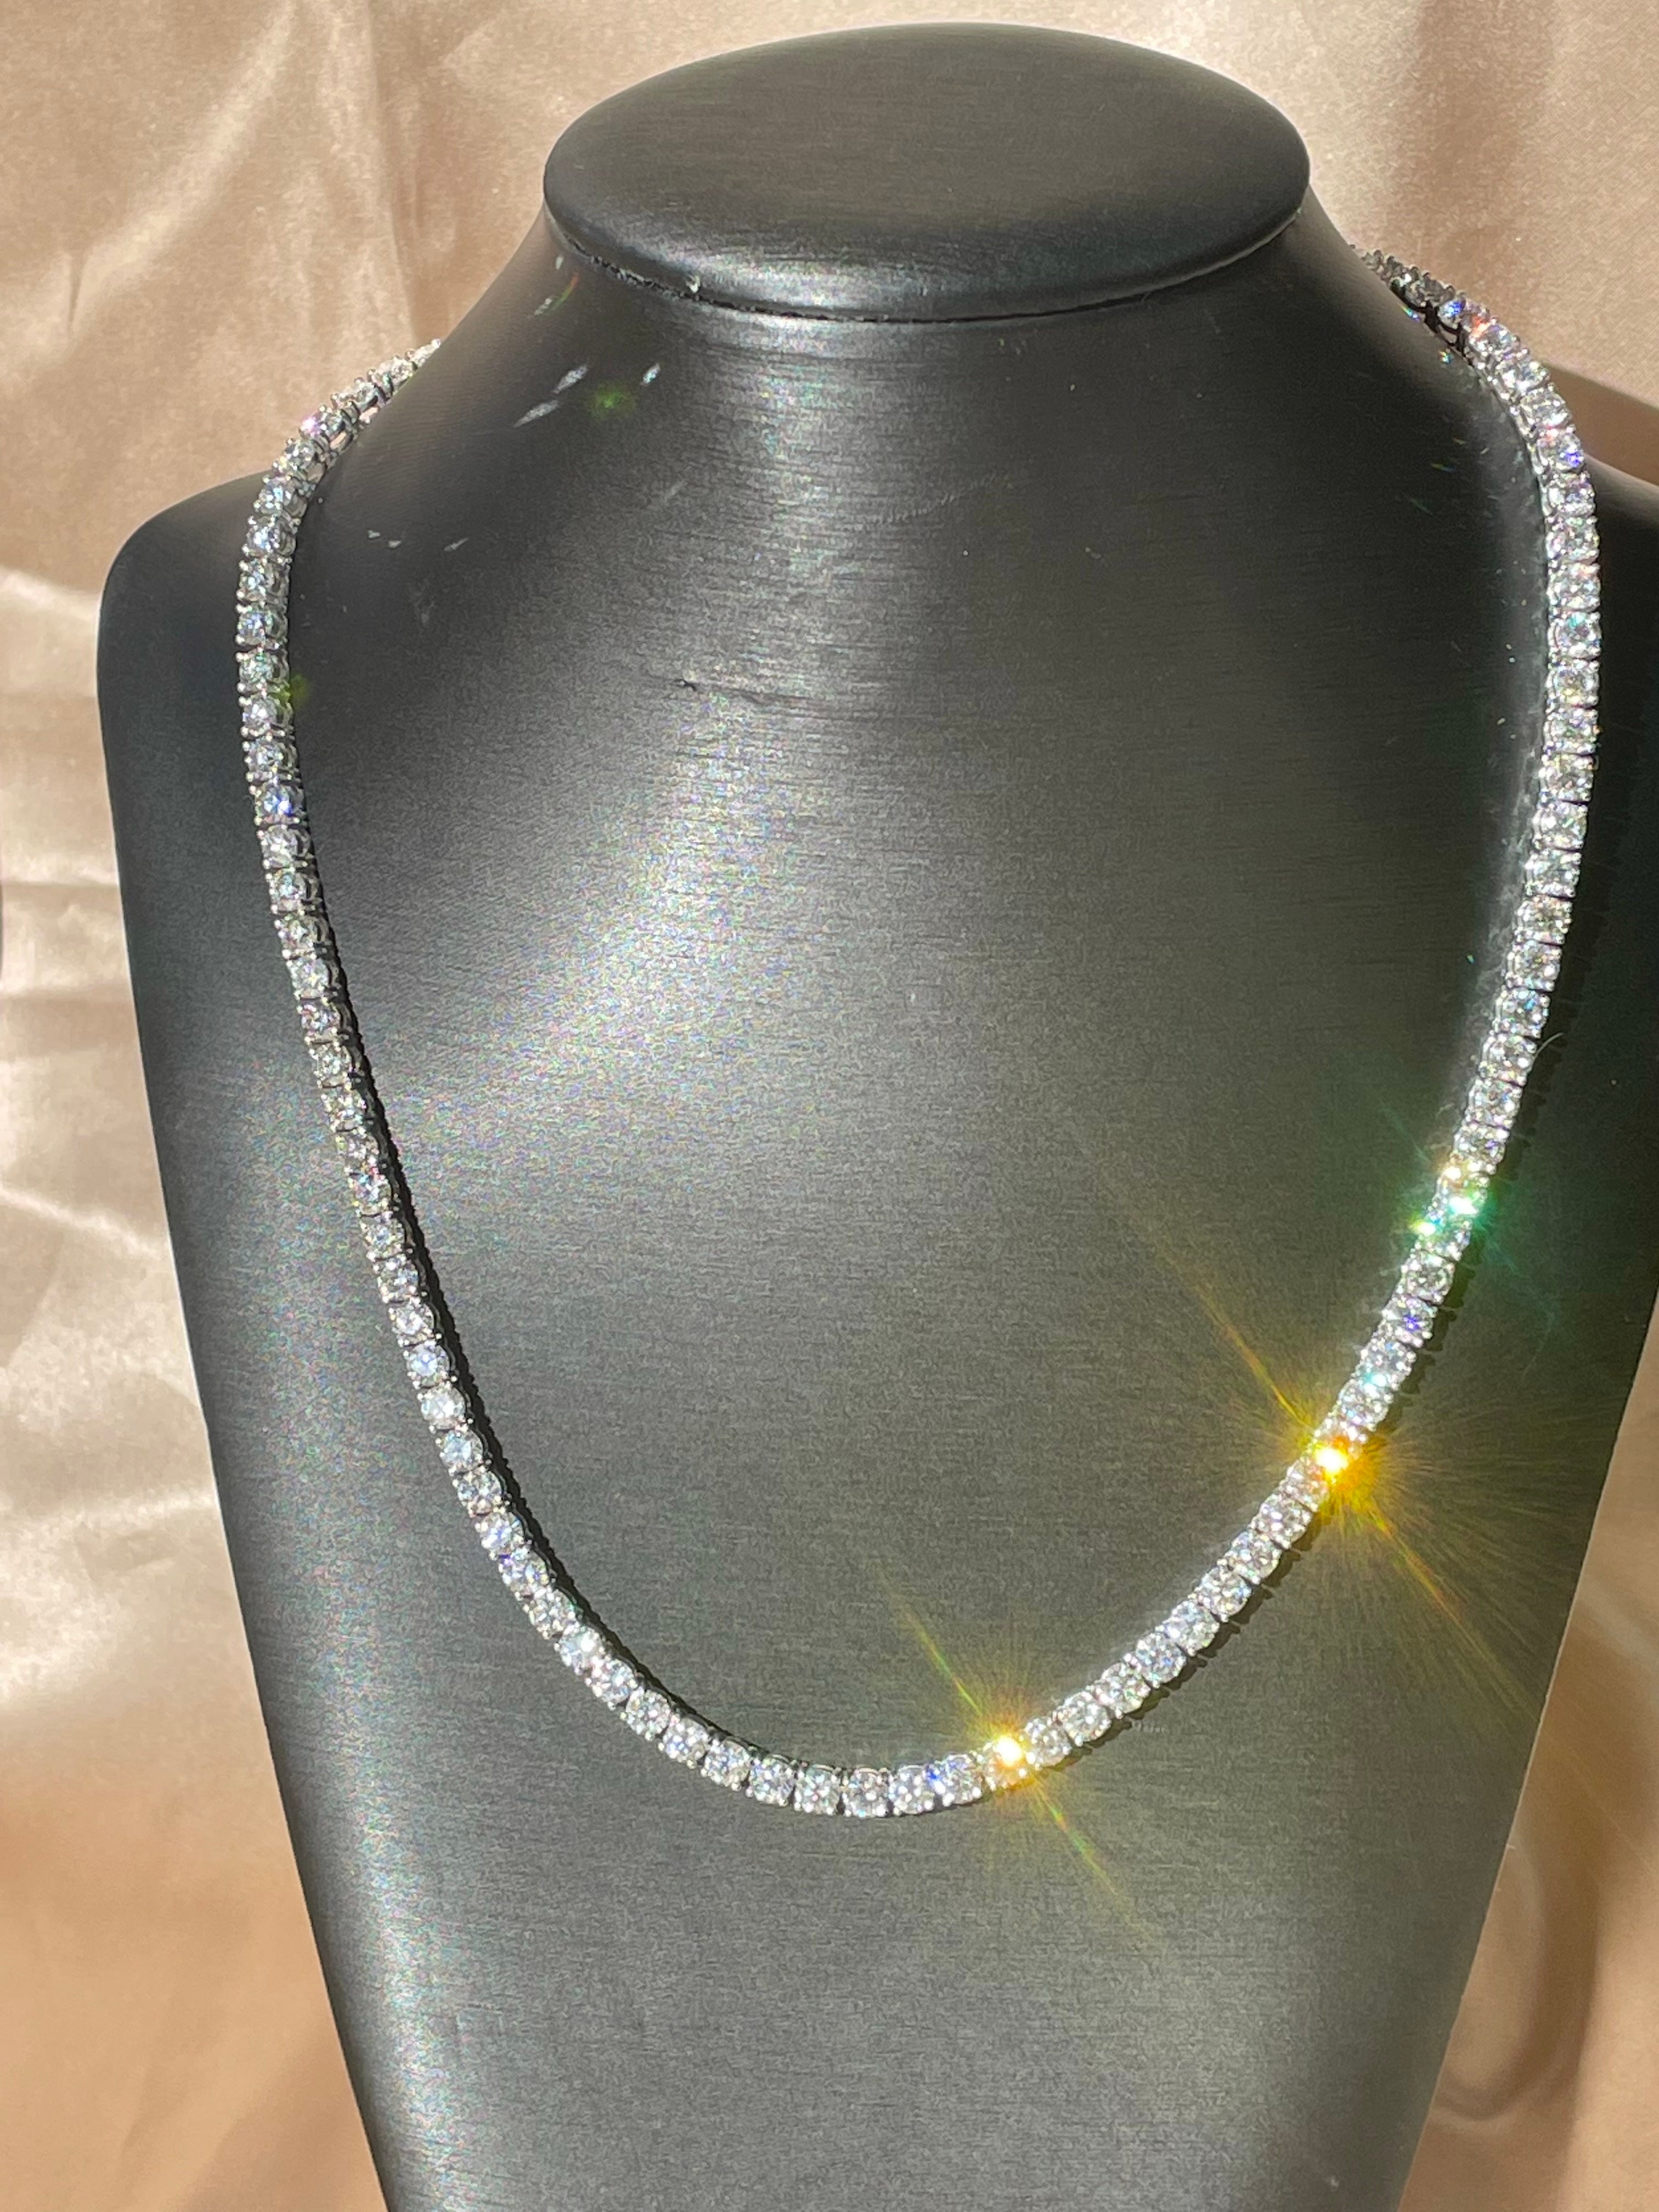 Classic and versatile necklace that can be pulled together with any outfit. This show stopping array of round natural diamonds is in a prong setting and is lined up perfectly to create the most elegant head turner diamond necklace. The pièce de